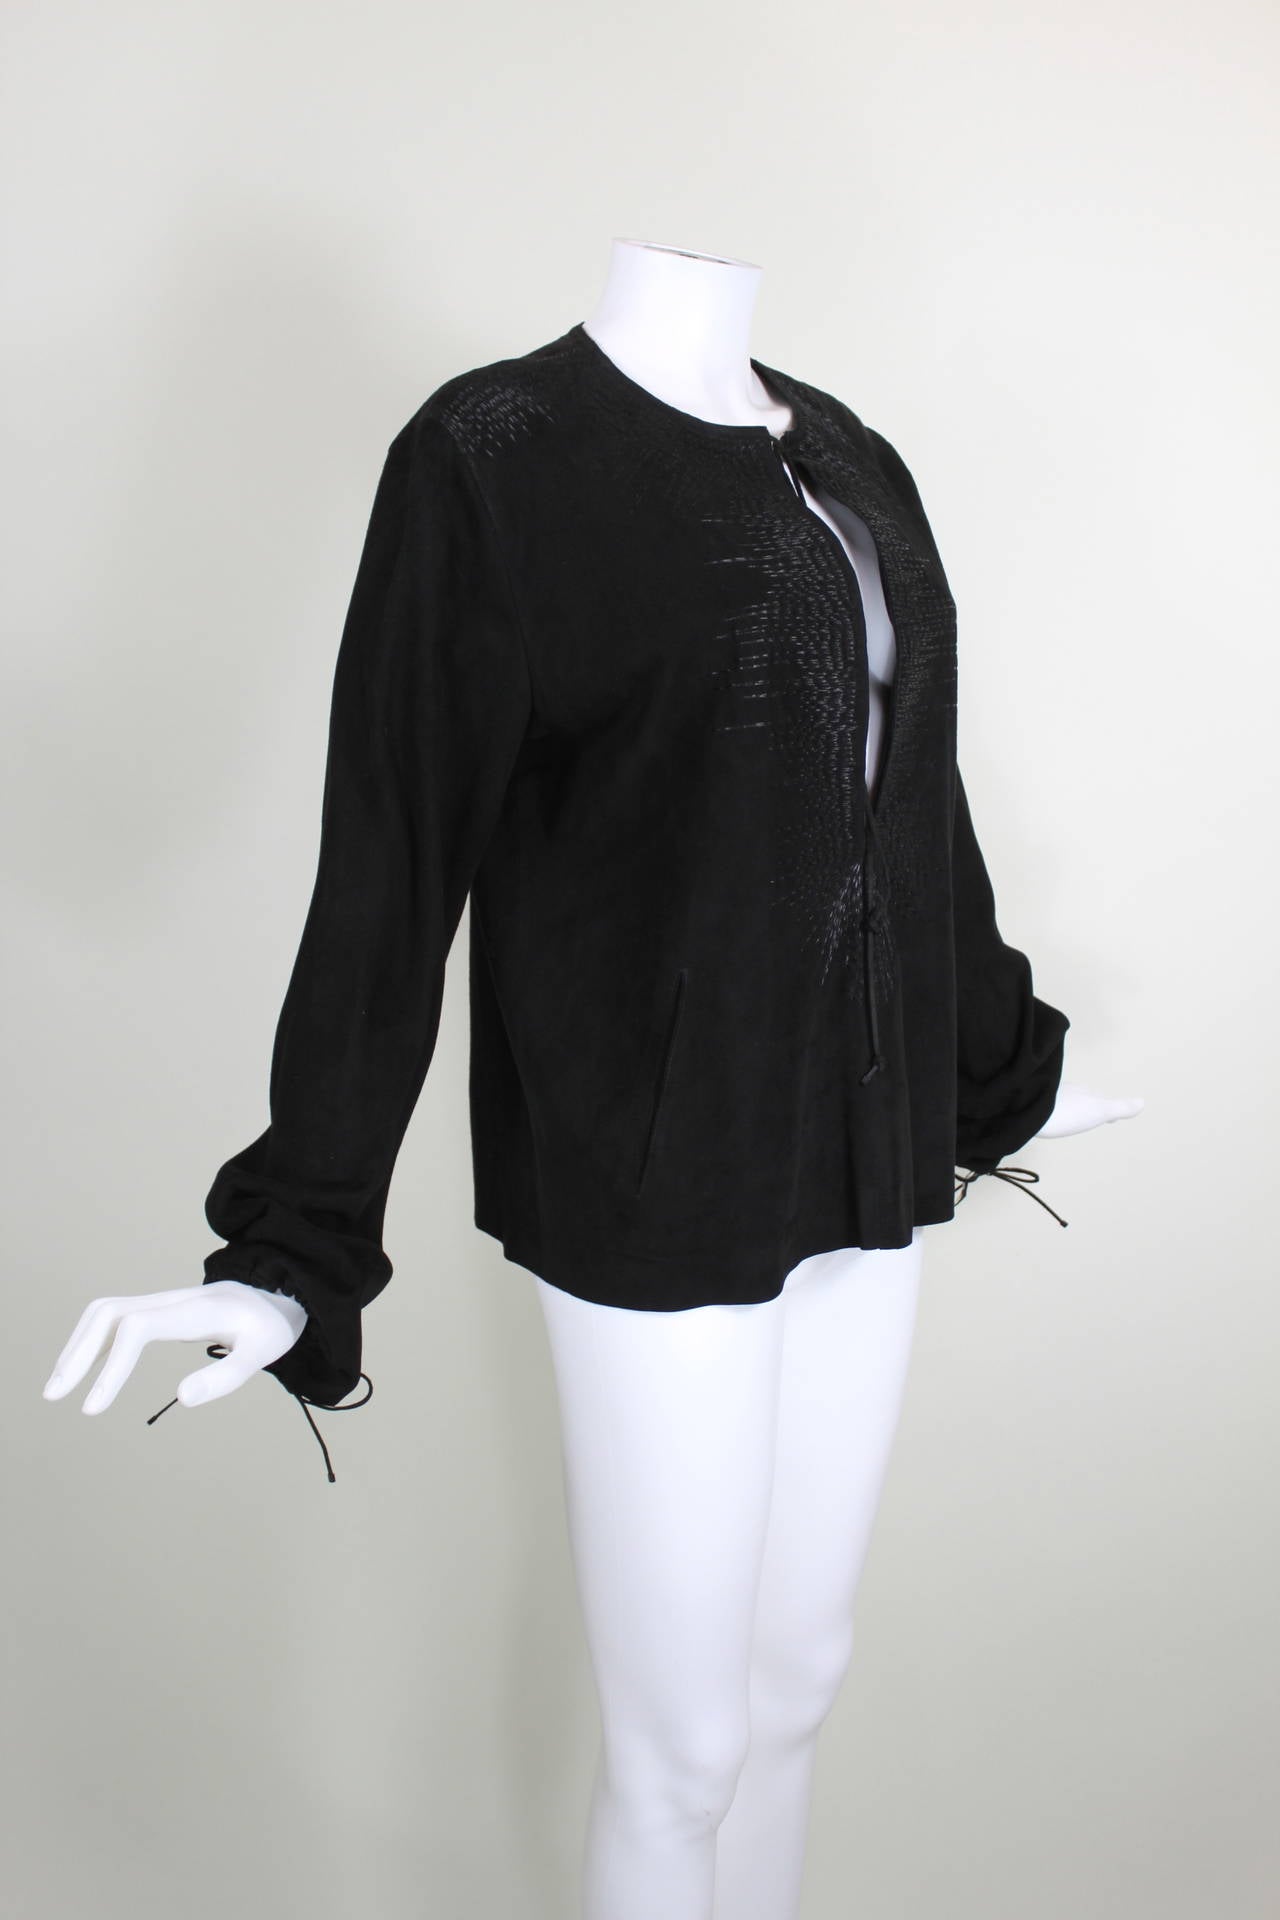 A luxe suede tunic from Gucci embellished with black metallic embroidery throughout. The tunic features a sexy deep-v that ties at the neck, gathered sleeves, and two pockets in the center. Unlined.

Measurements--
Labeled a size 44
Bust: up to